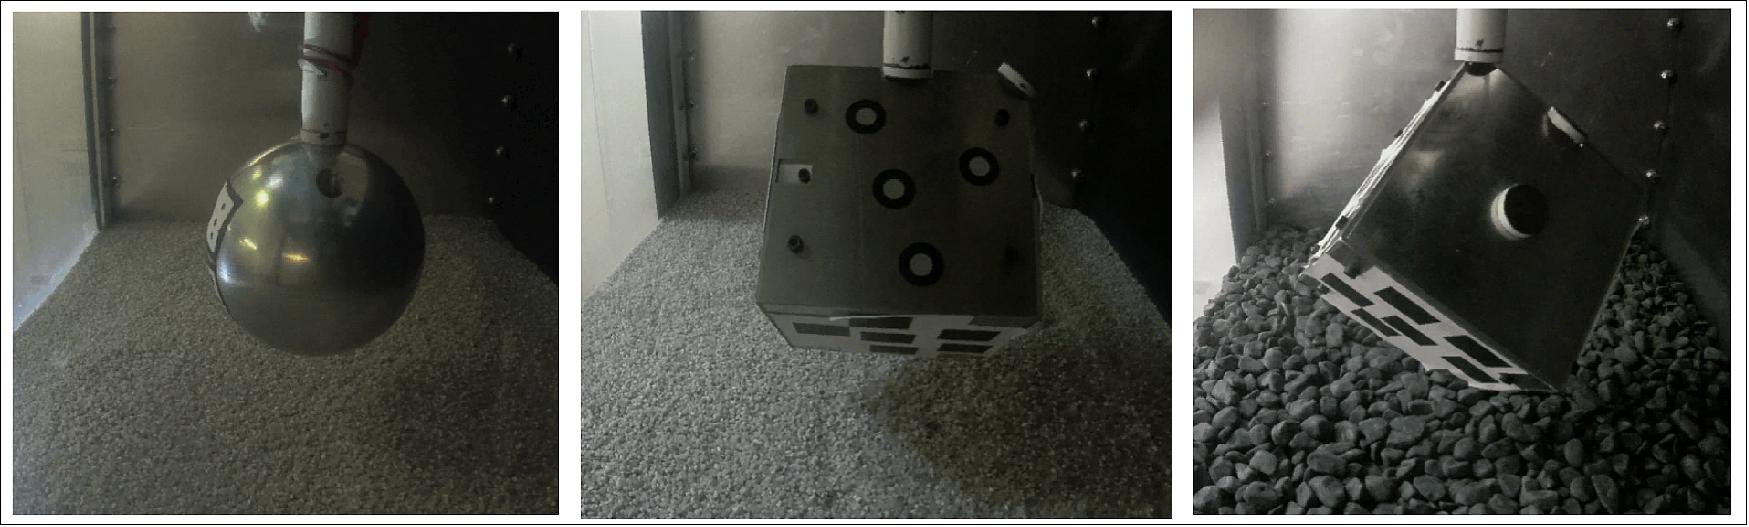 Figure 39: Lander models inside drop box. Different test models landing on the simulated asteroid terrain inside the ISAE-Supaero drop tower's test box, to investigate landing behavior in low-gravity conditions. An existing drop tower, previously designated for aircraft and material drop-tests was customized with a system of pulleys and counterweights to simulate reduced-gravity. The test models began as spherical in shape, progressing to CubeSat-shaped test models, and are embedded with accelerometers (image credit: ISAE-Supaero–N. Murdoch)